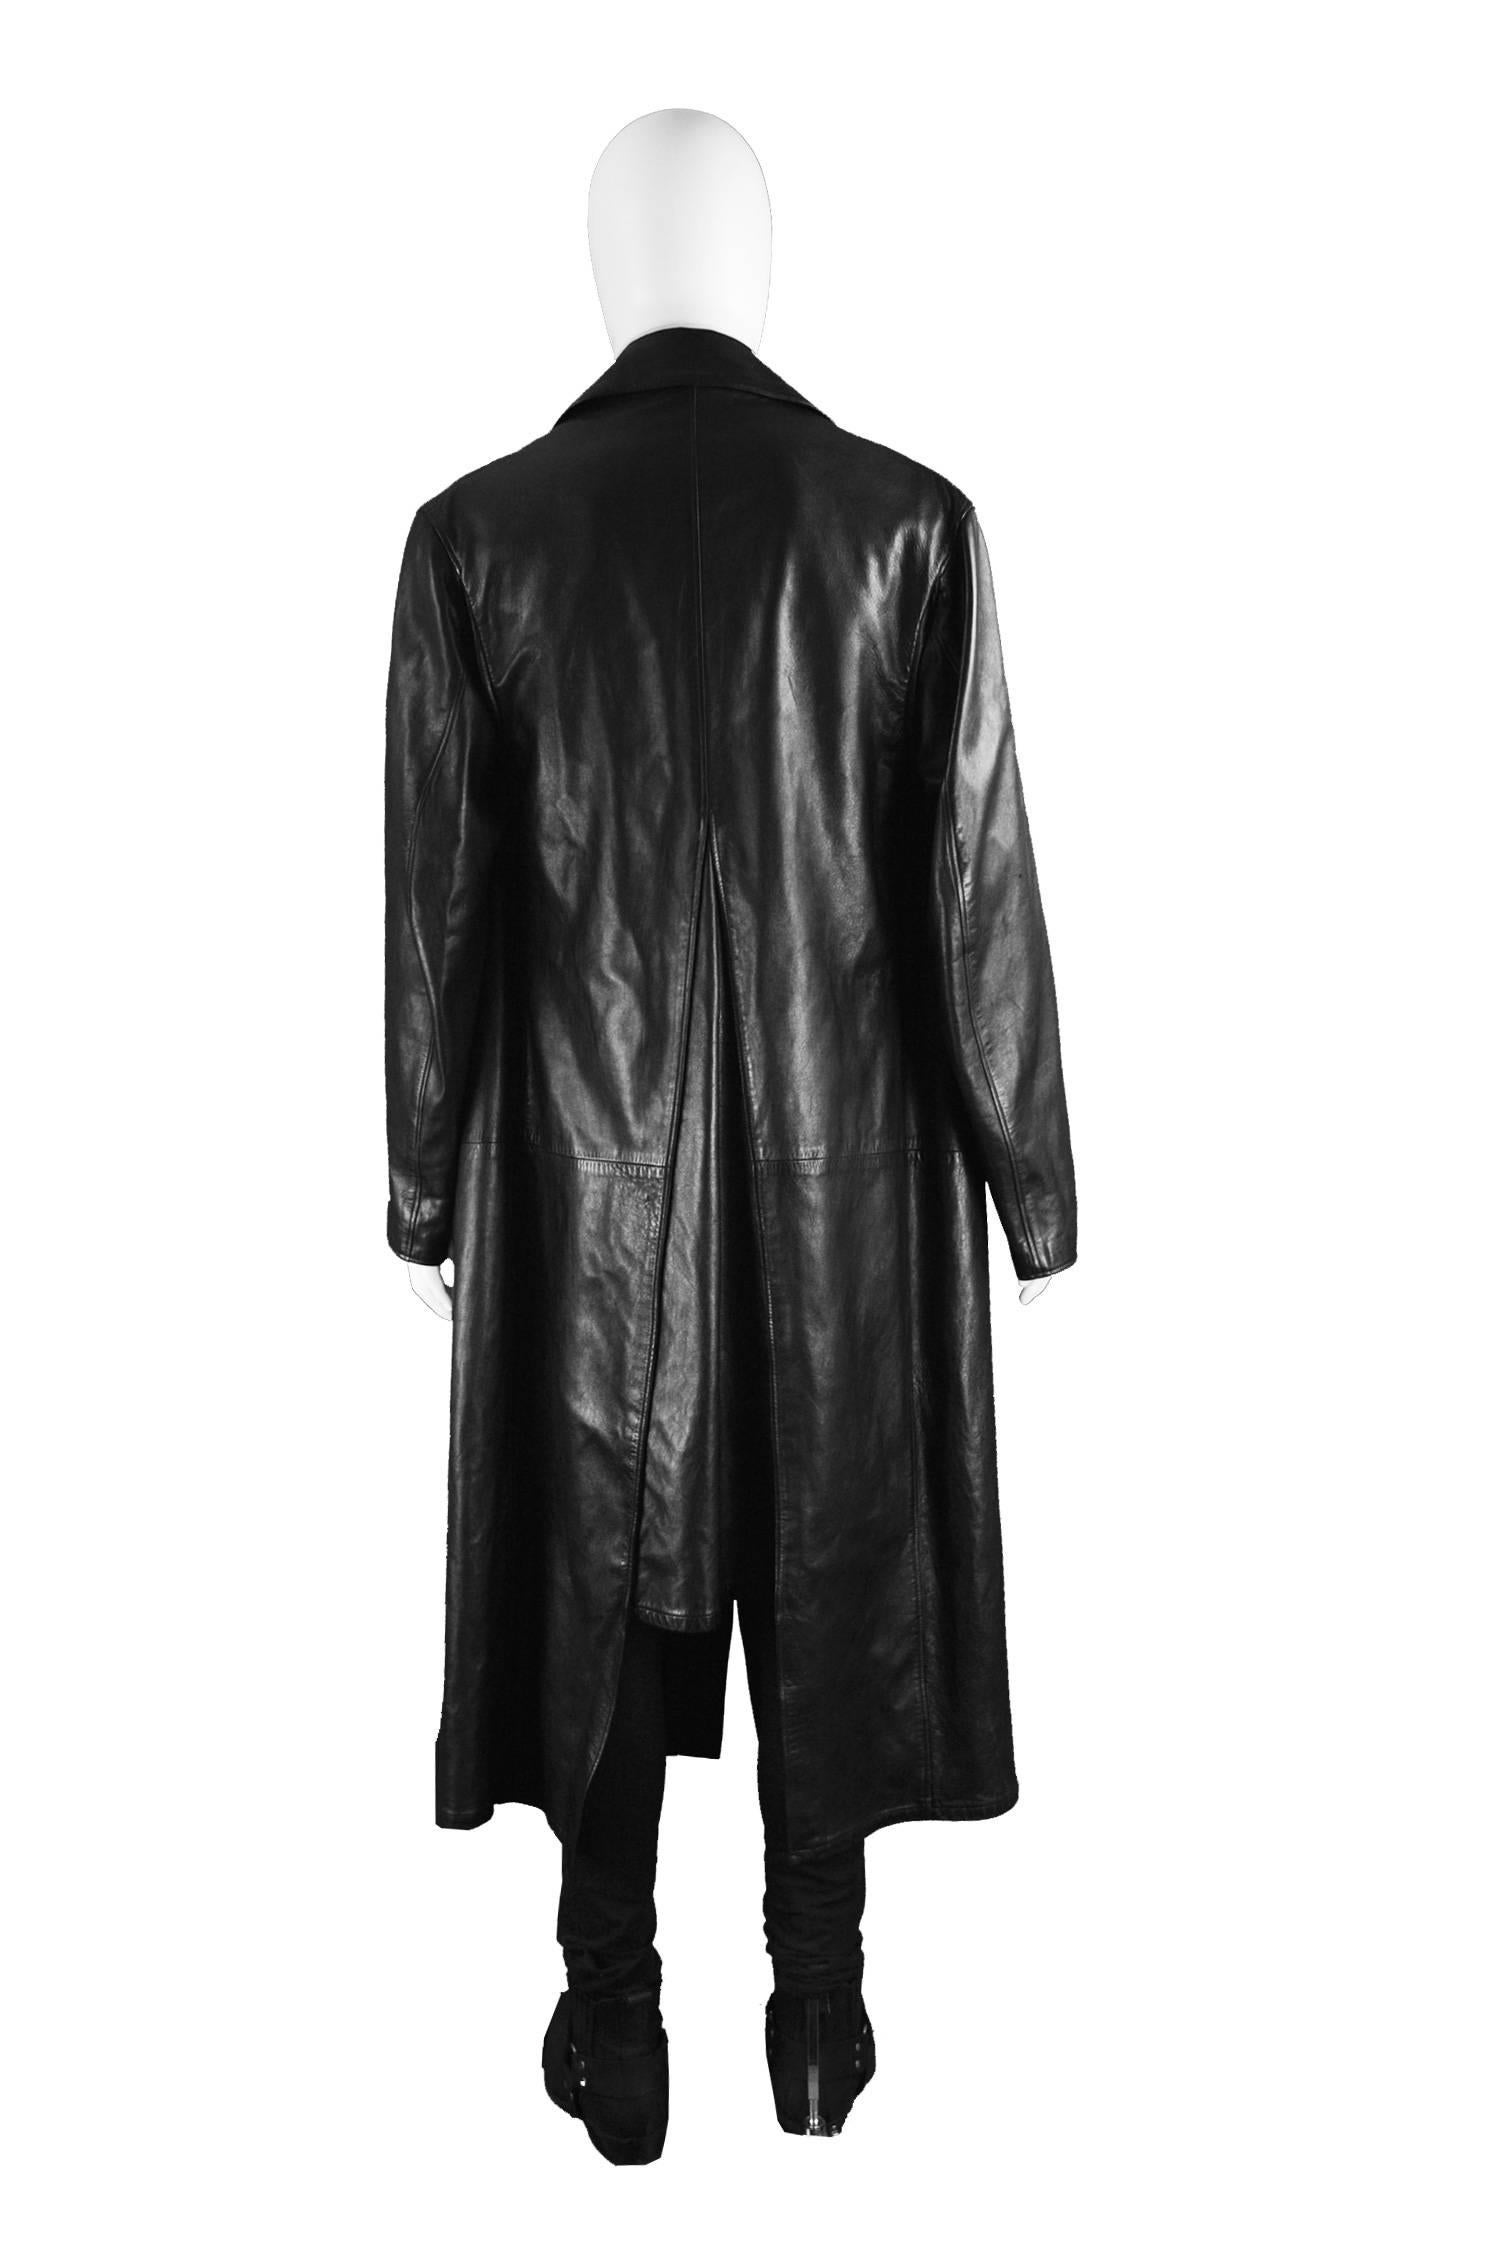 Gianni Versace Men's Black Leather Long Maxi Trench Coat, F/W 1998 1